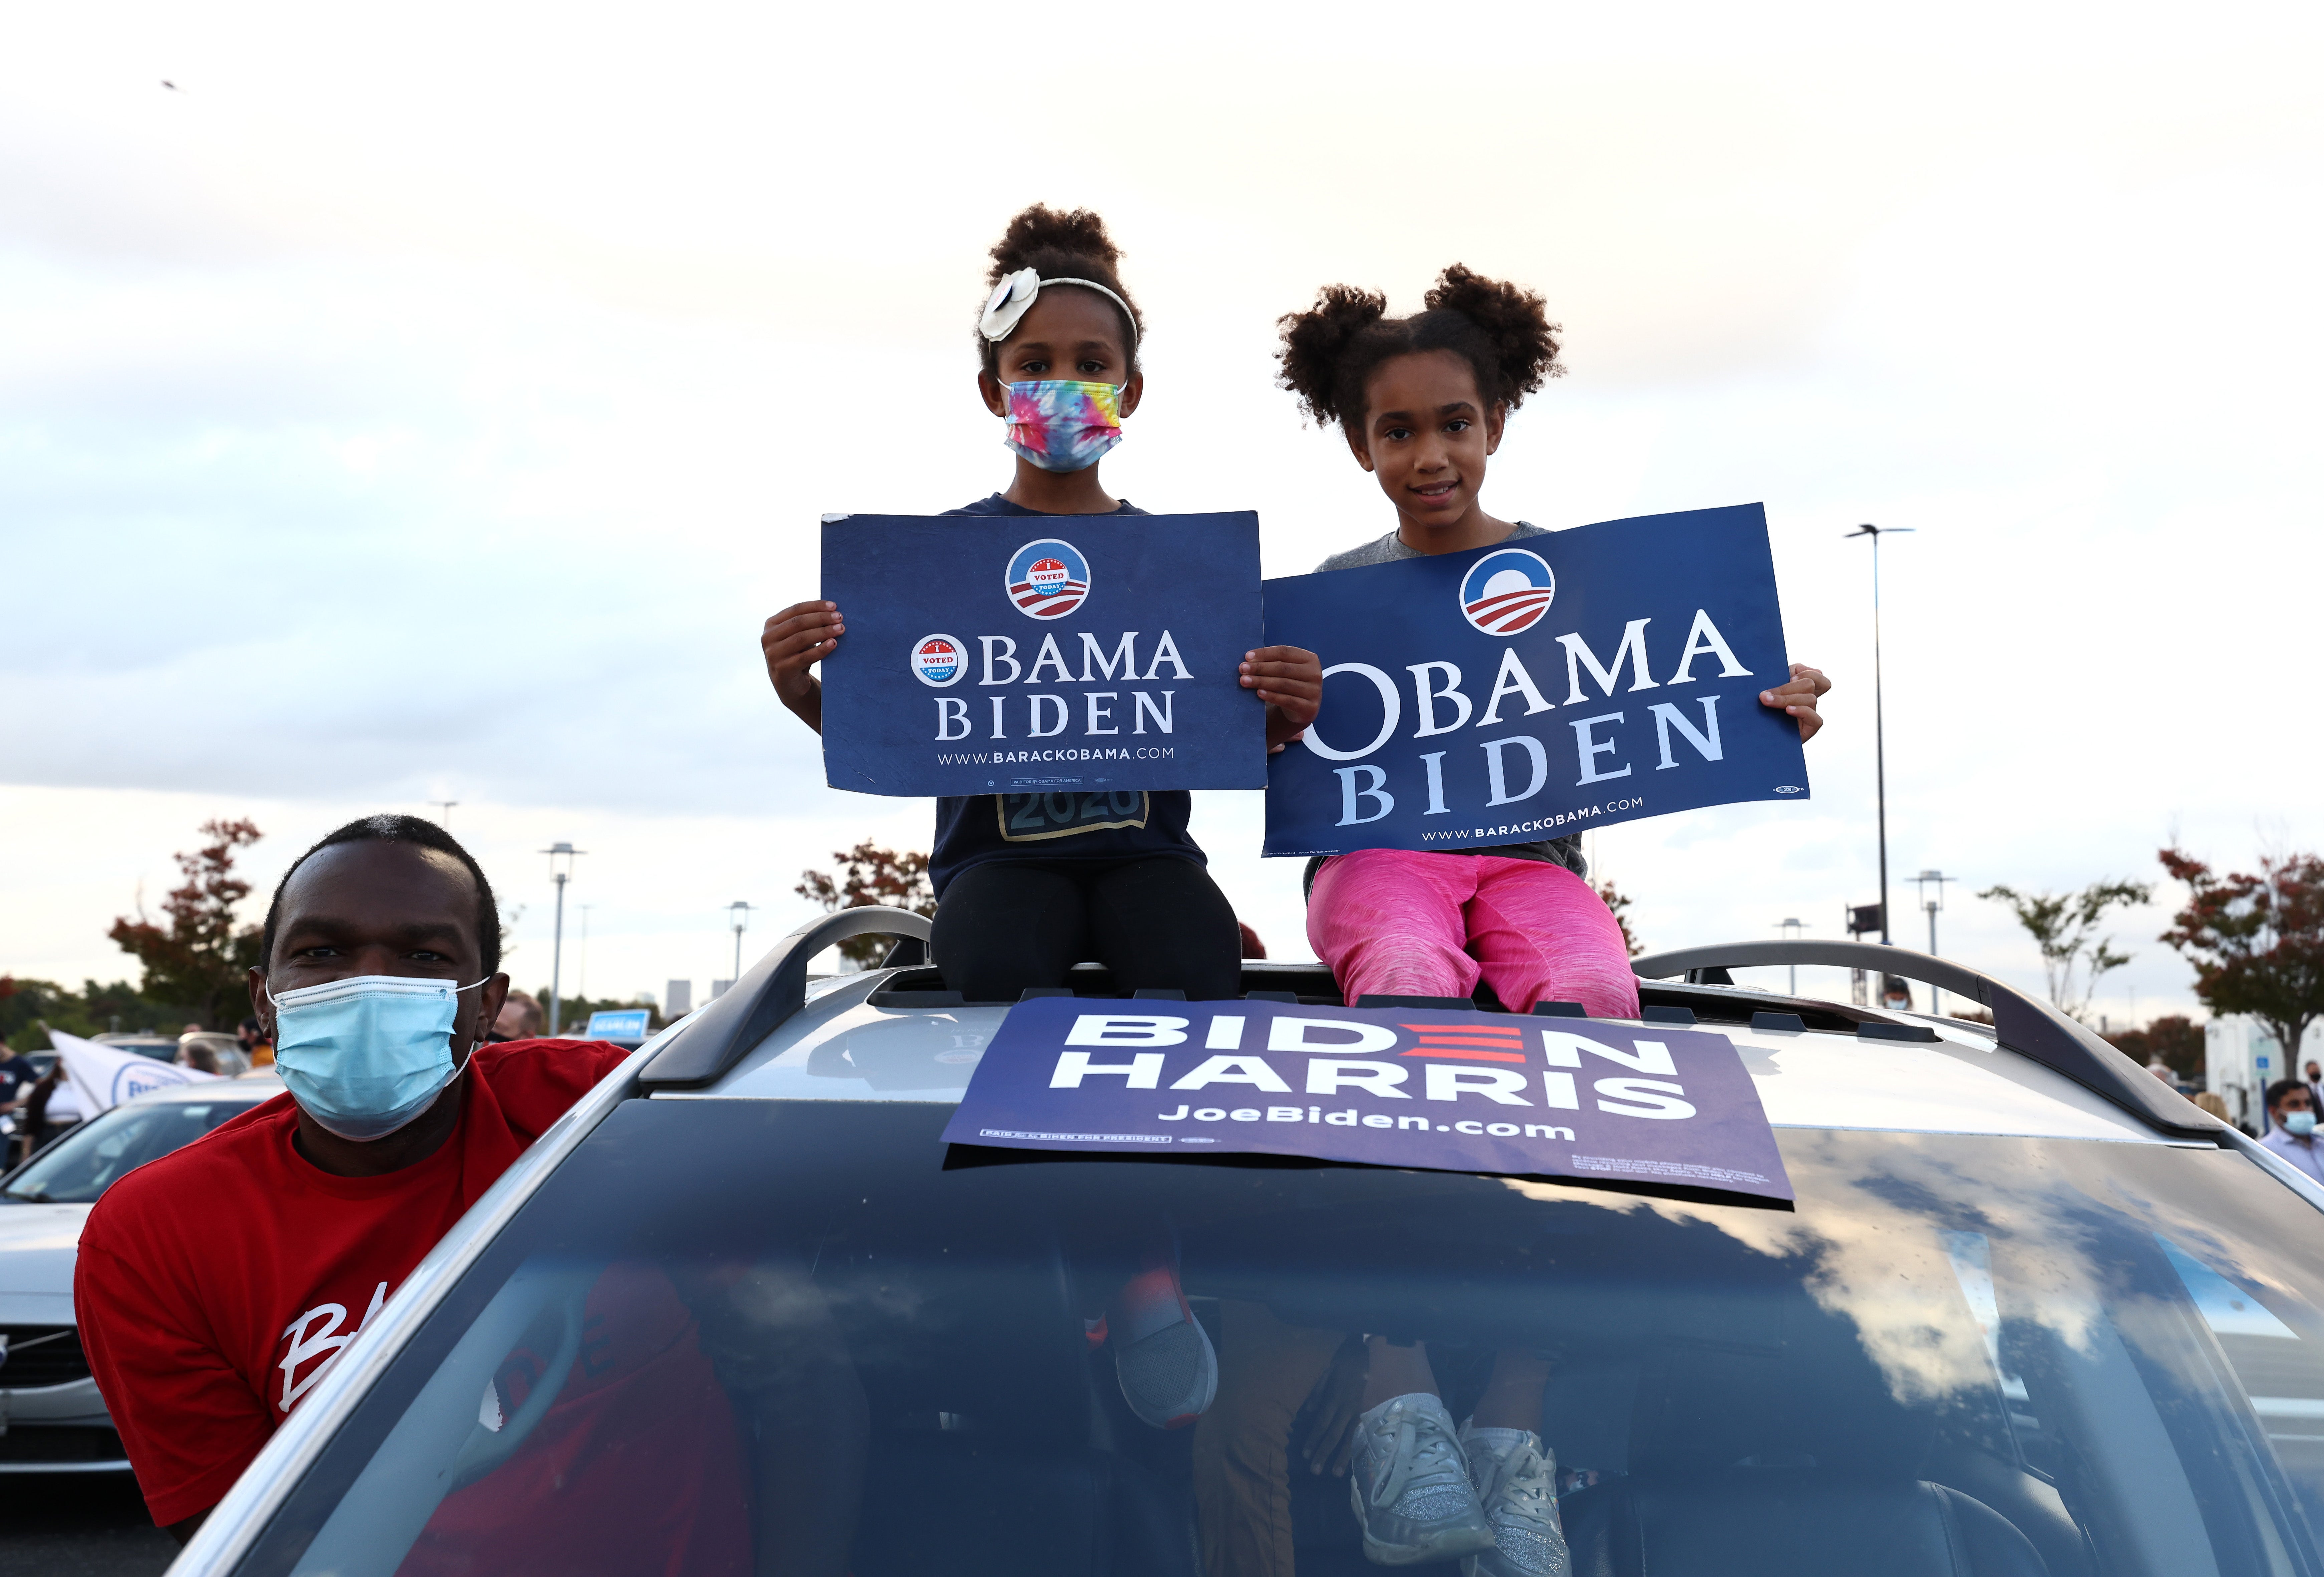 Sozi Tulante (L) and his two daughters Zolana 7, and Sengele 9, gather to listen to former President Barack Obama speak at a drive-in rally while he campaigns for Democratic nominee and former Vice President Joseph Biden on October 21, 2020 in Philadelphia, Pennsylvania. Today is the first in-person campaigning for former President Barack Obama who is campaigning for the Biden Harris ticket. (Photo by Michael M. Santiago/Getty Images)